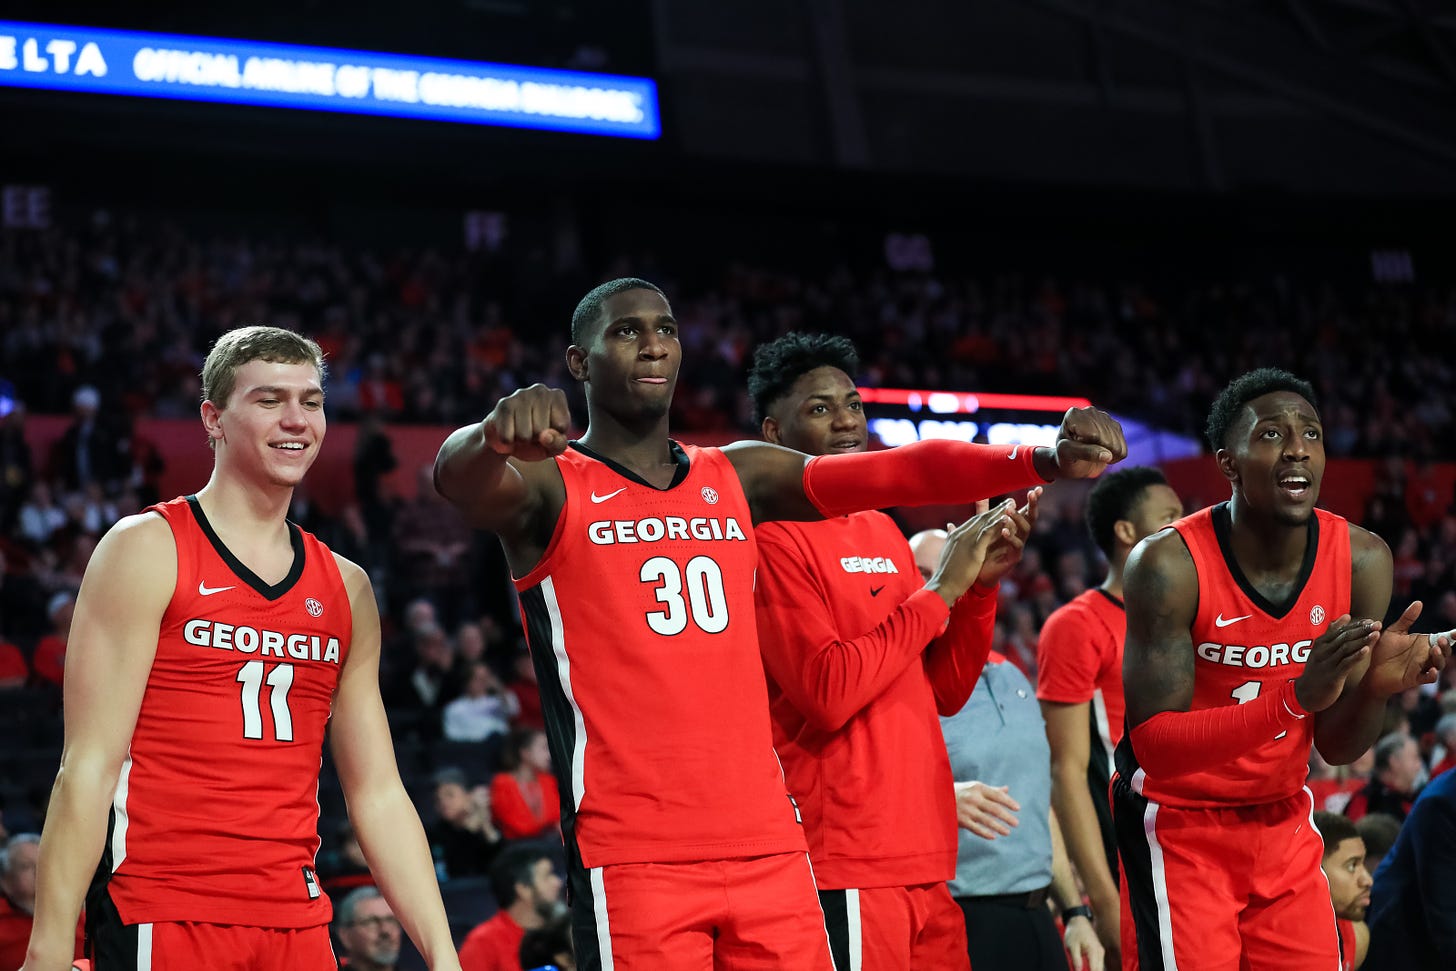 Georgia basketball: Four reasons to be excited about the 2020-21 Bulldogs